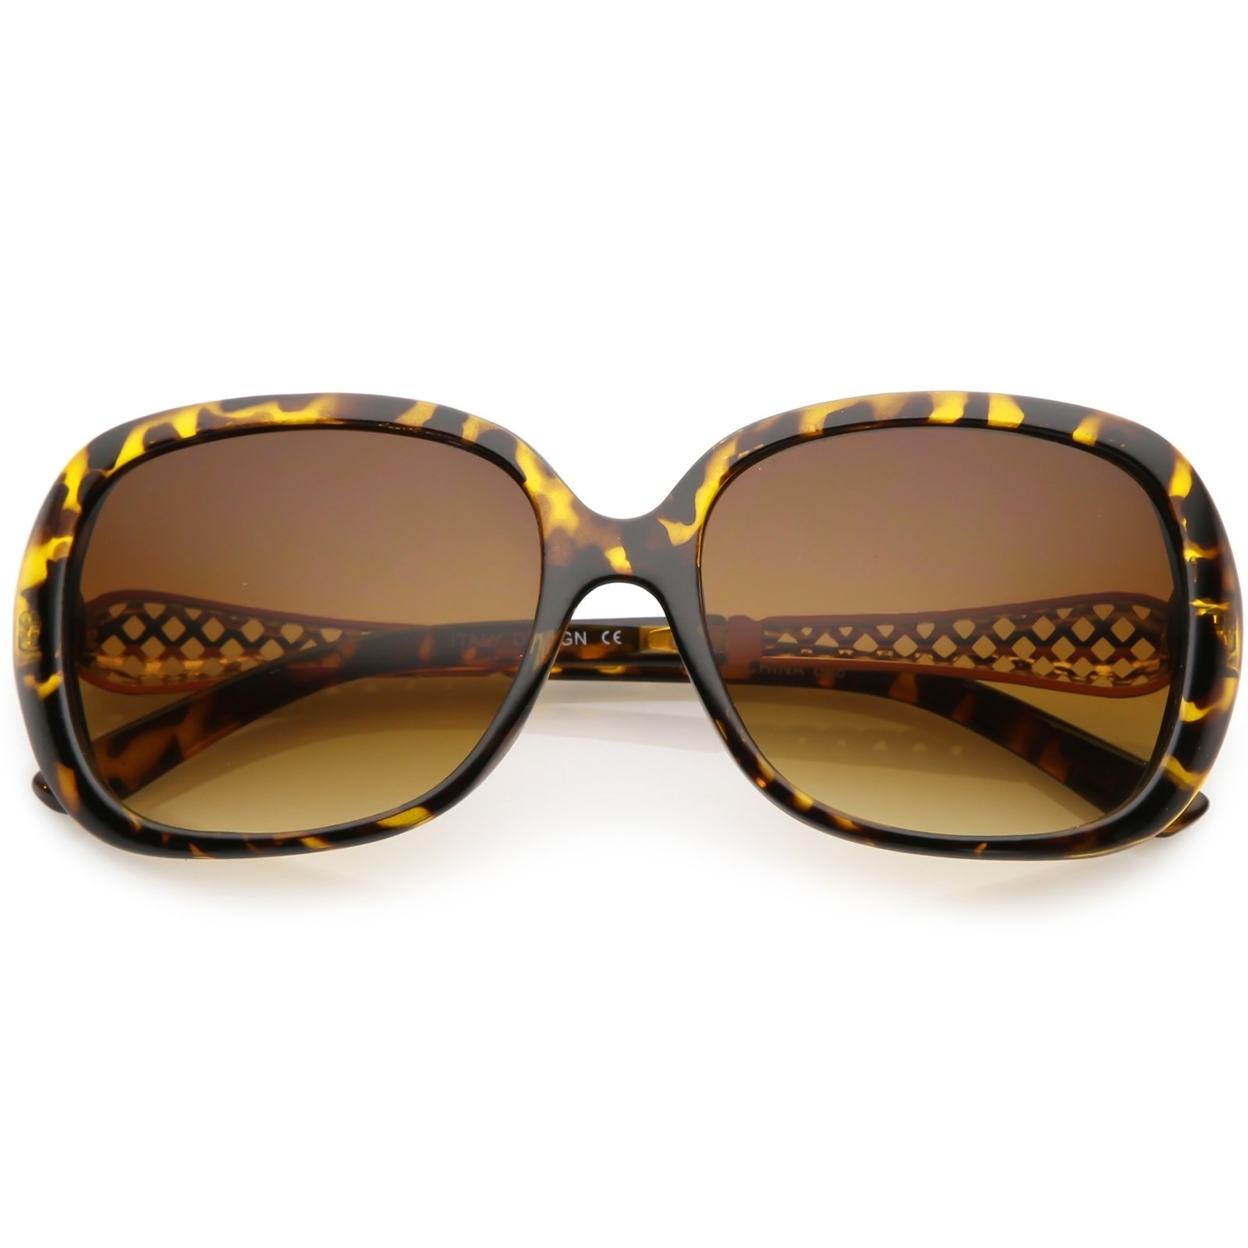 Women's Oversize Square Sunglasses With Metal Arm Accents Gradient Lens 59mm - Tortoise Gold / Amber